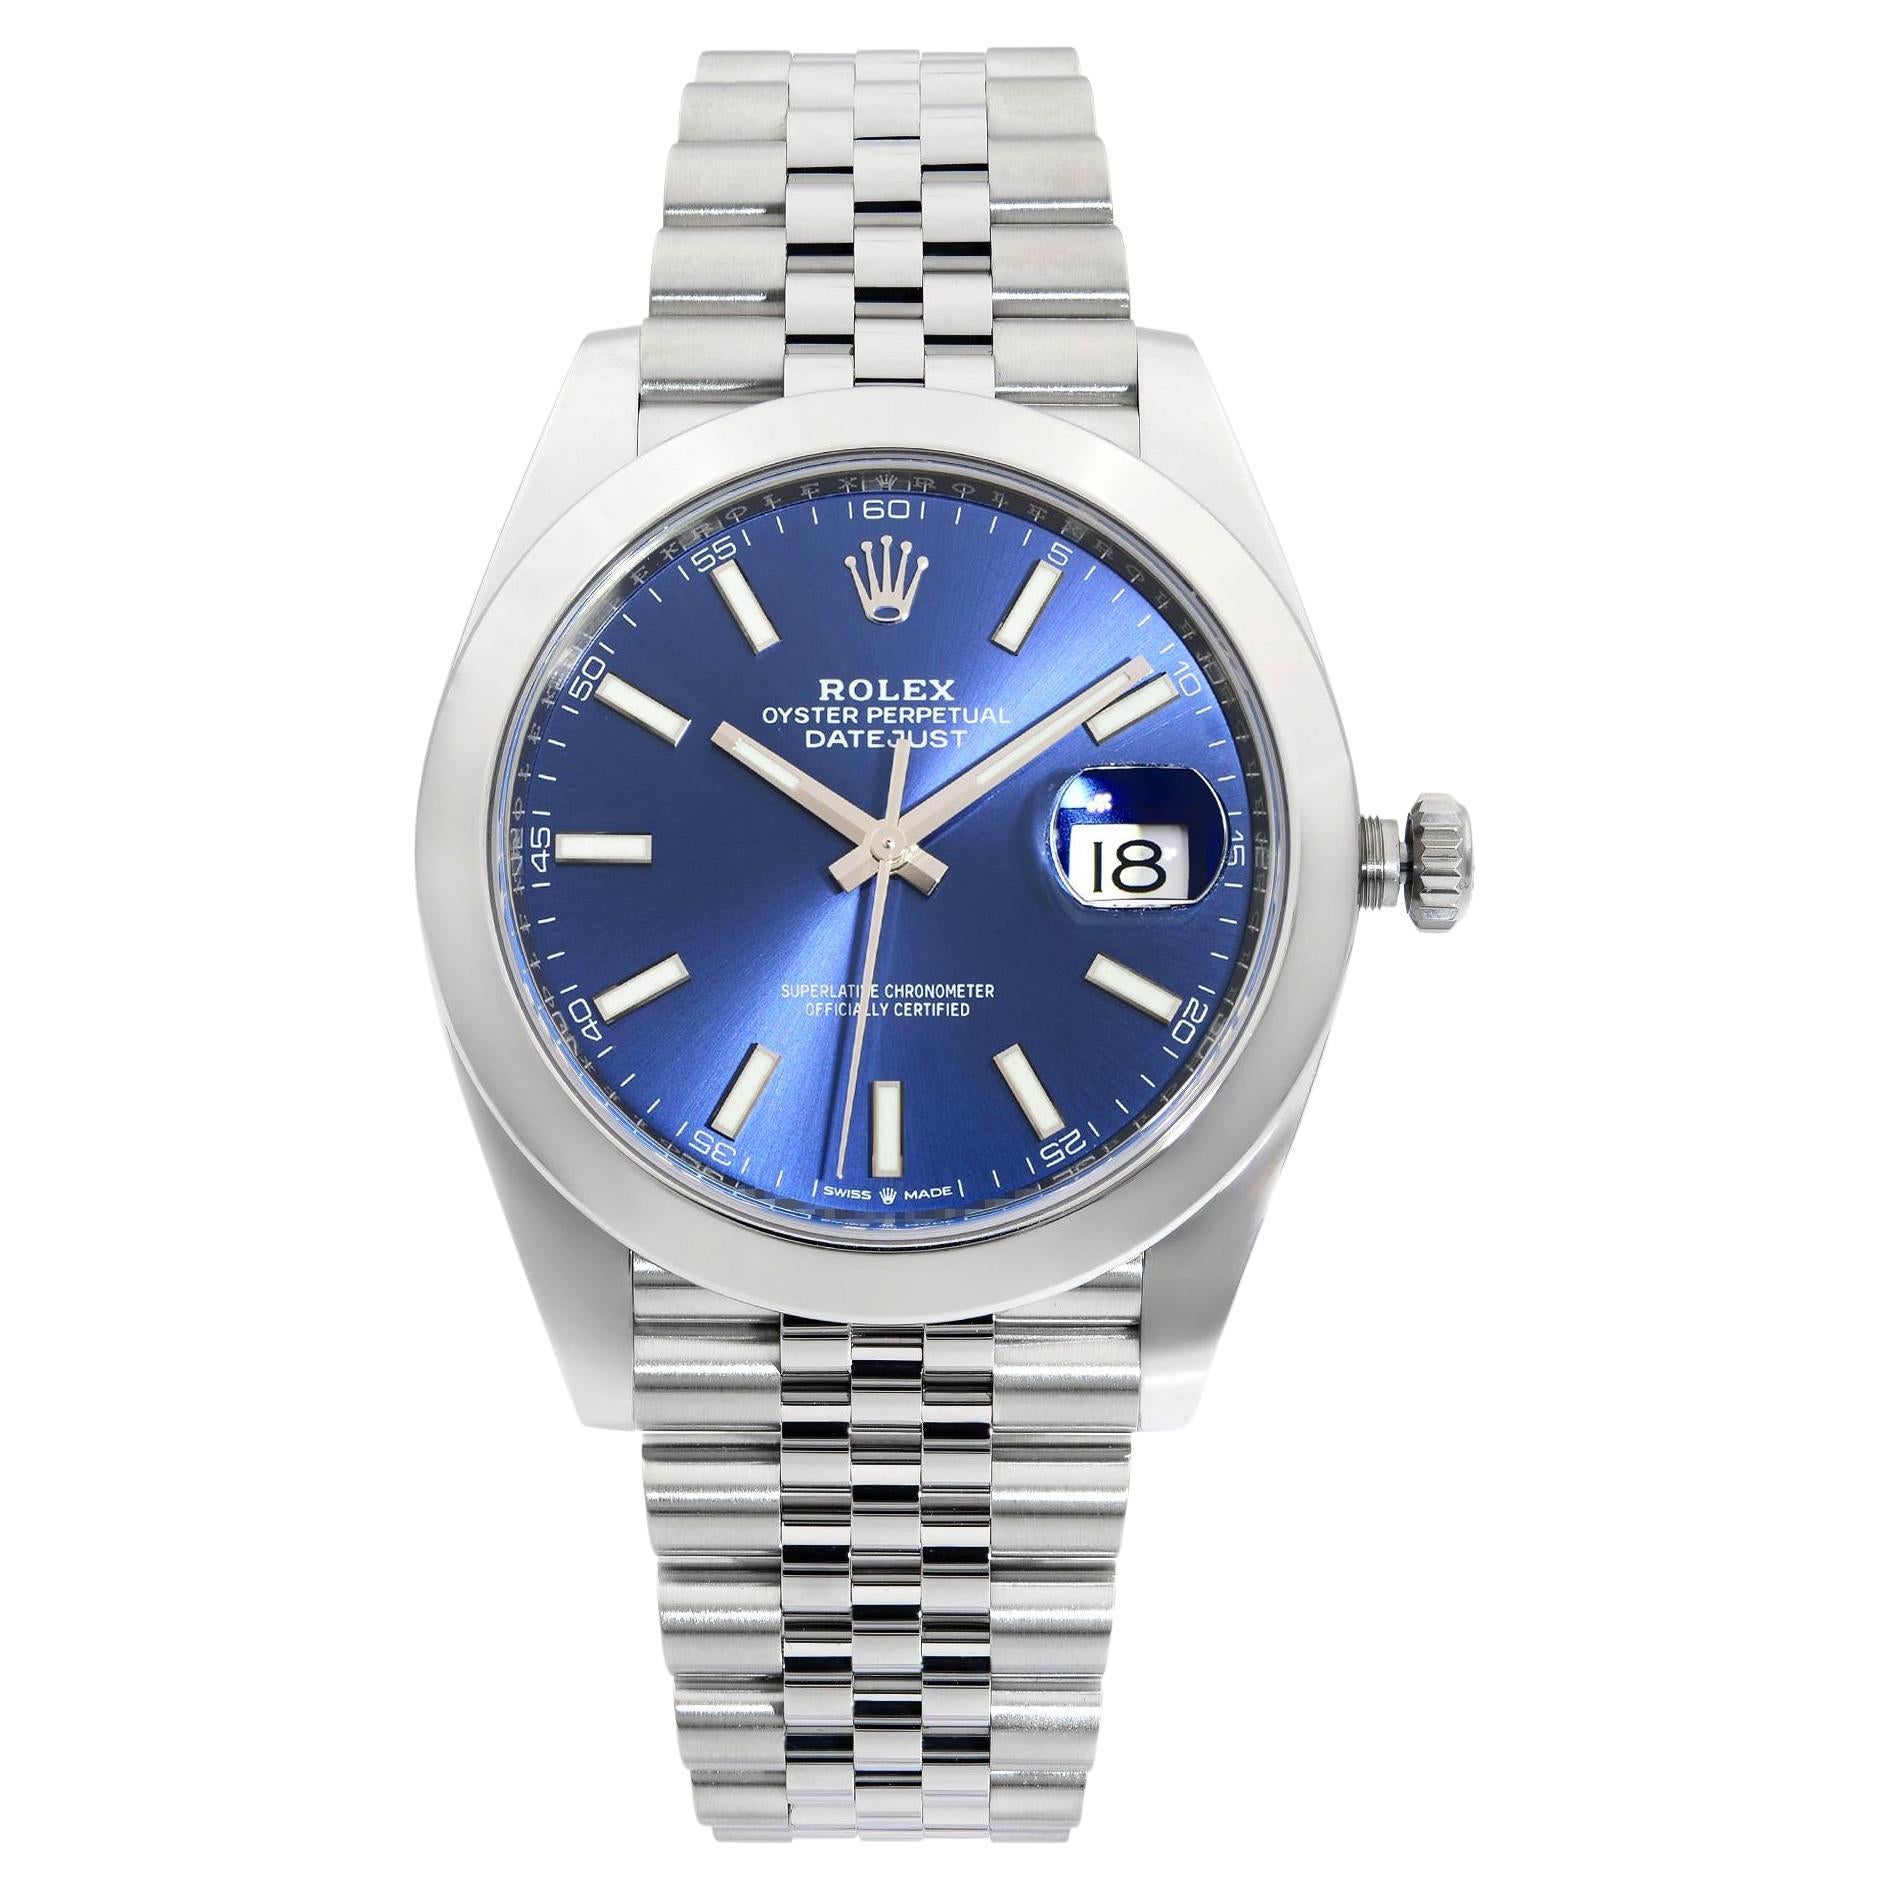 Rolex Datejust 41mm Steel Blue Index Dial Jubilee Smooth Automatic Watch 126300 en vente